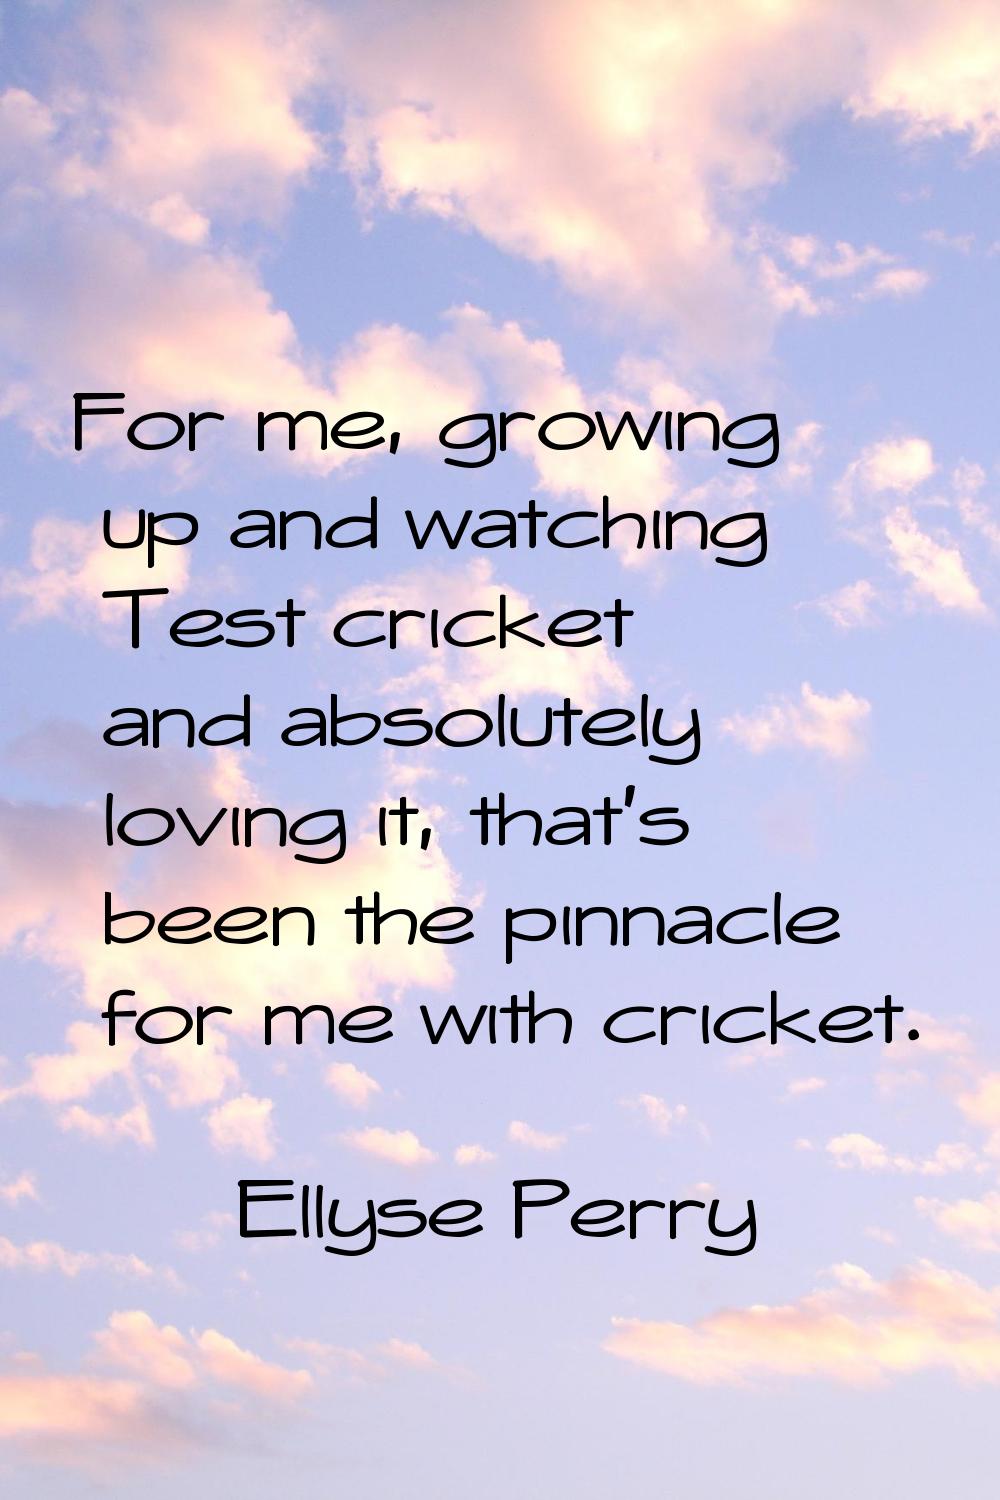 For me, growing up and watching Test cricket and absolutely loving it, that's been the pinnacle for